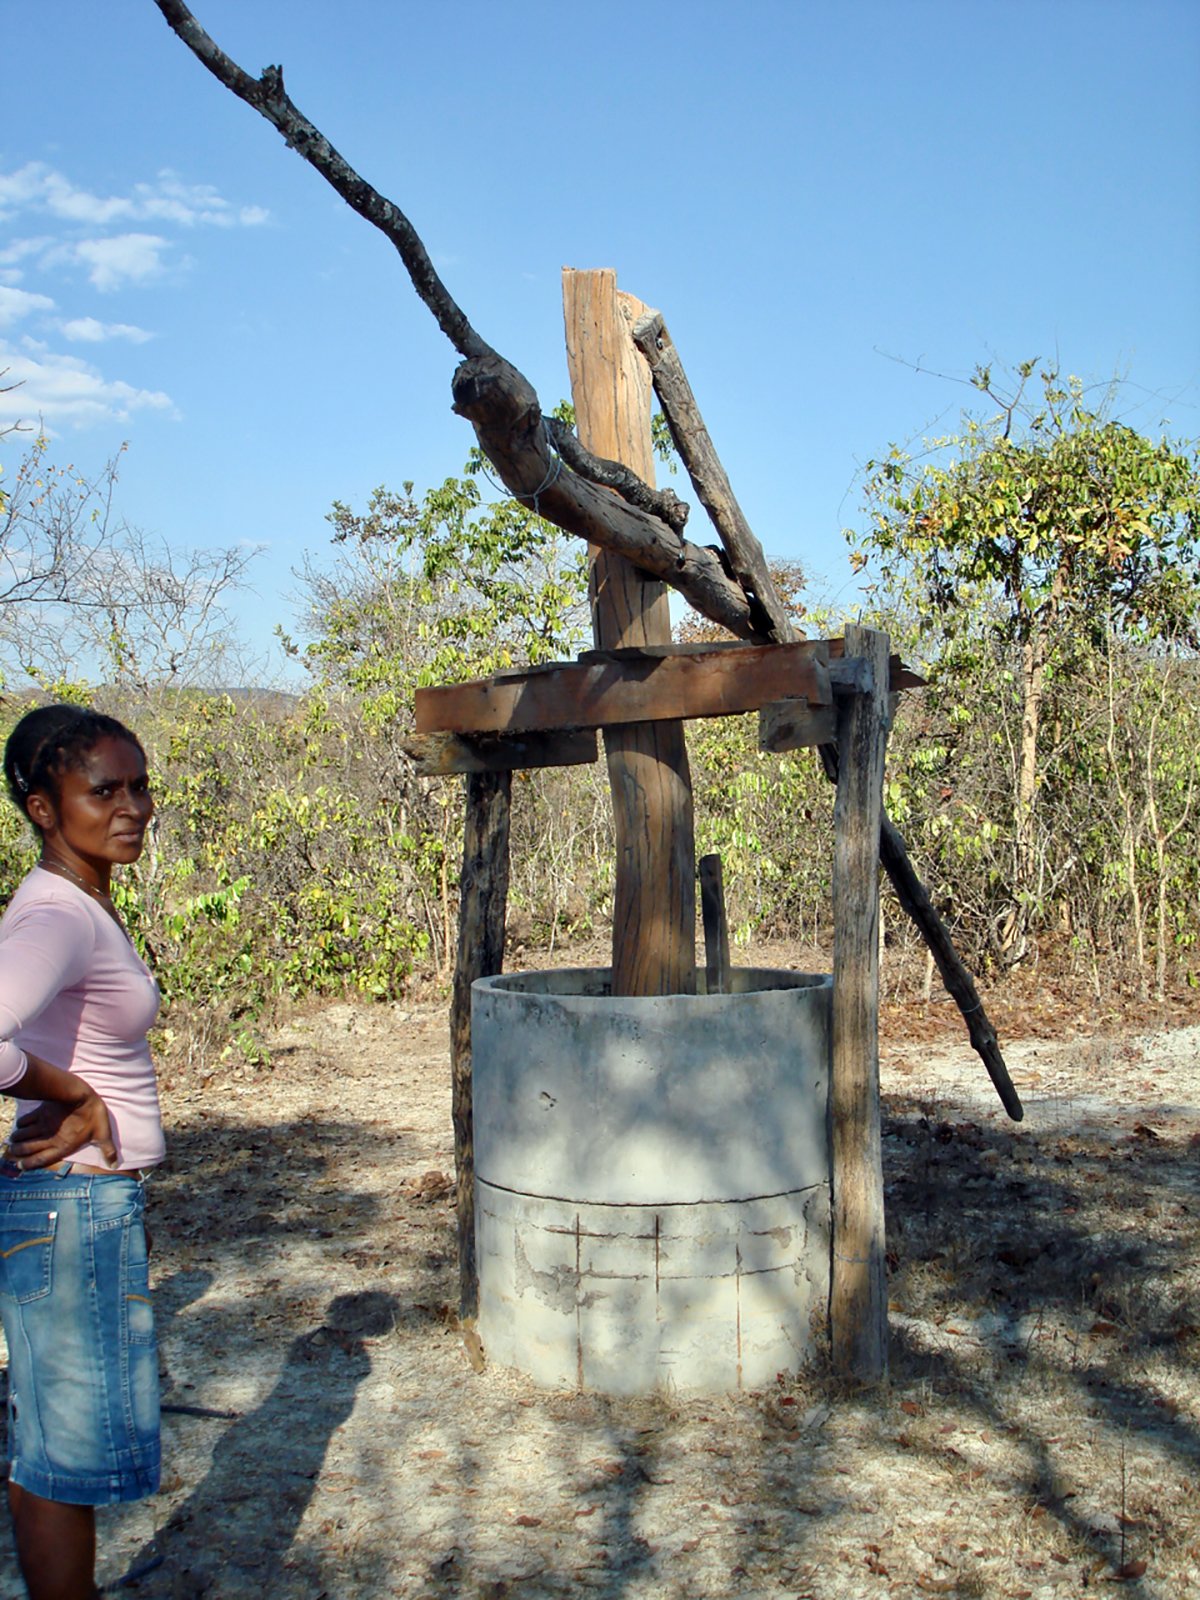 grinding yuca root to flour by the Quilombo communities